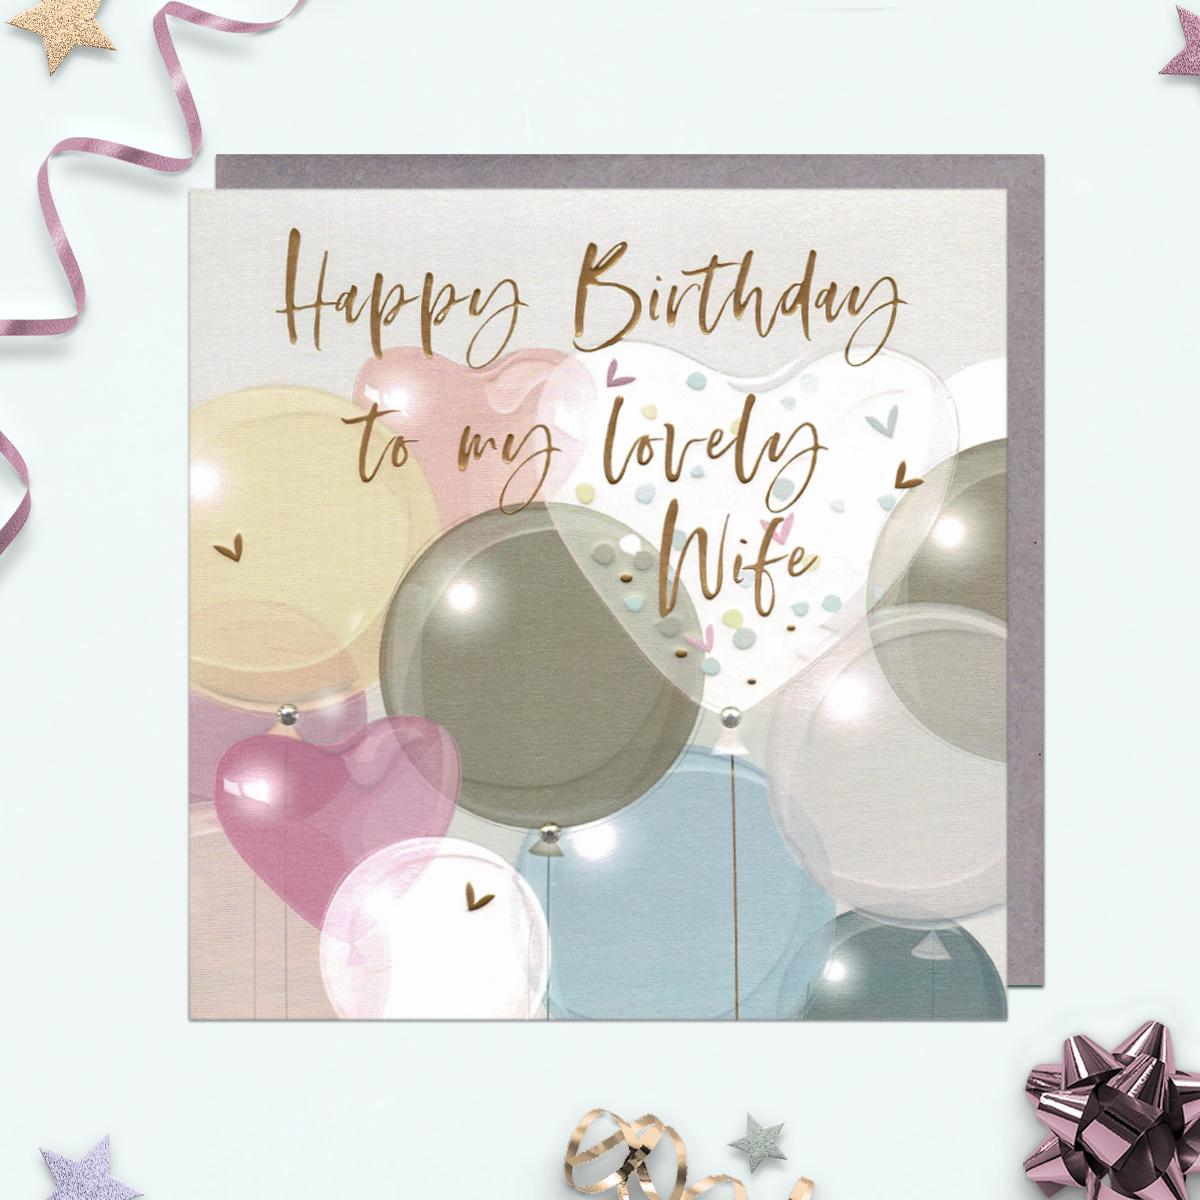 A Stunning Wife Birthday Card In Pastel Colours With Gem Attachments And Gold Foil Detail. Complete With Grey Envelope And Blank Inside for Own Message